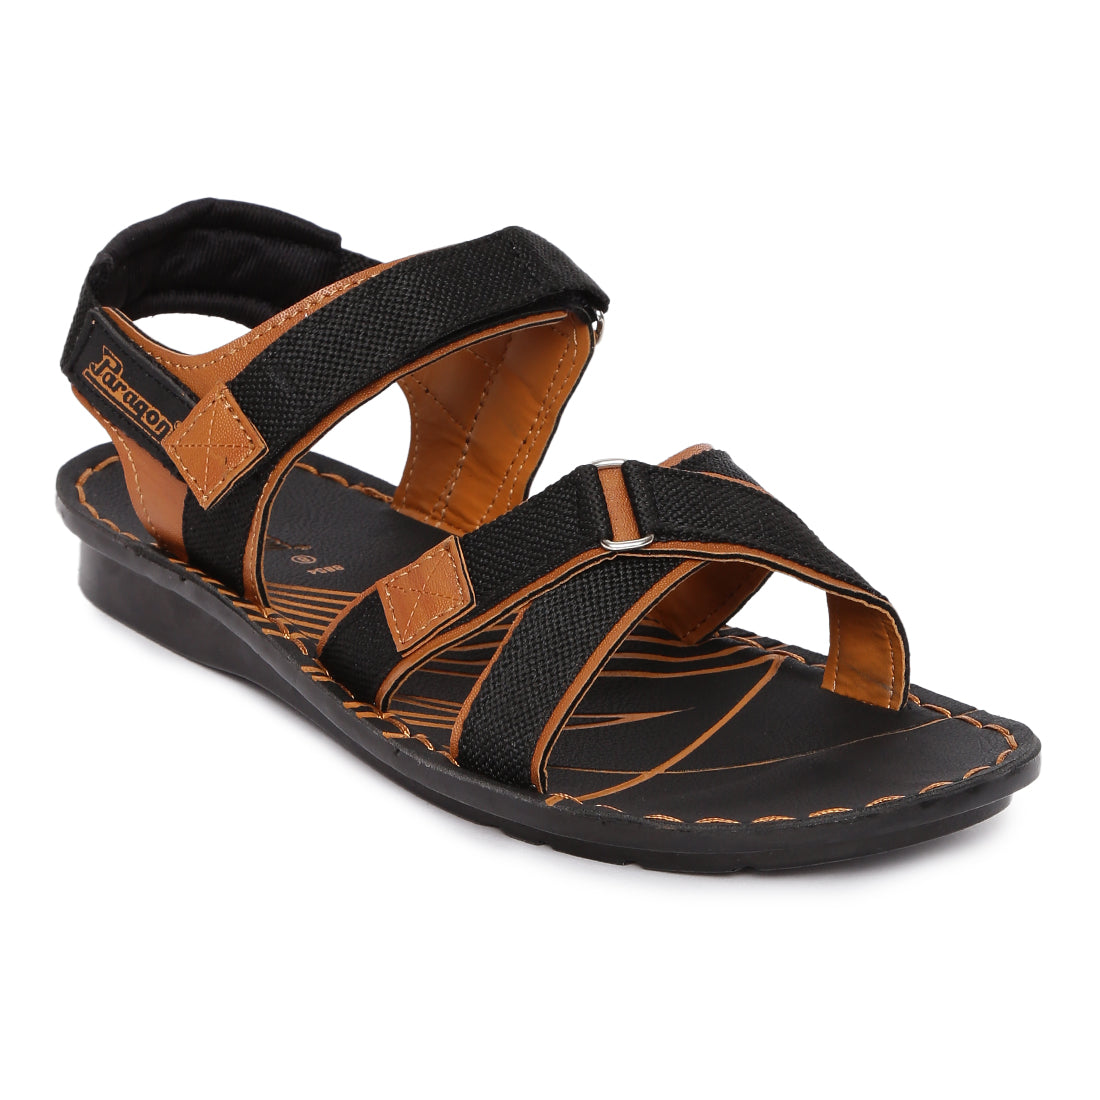 Paragon PU8854G Men Stylish Sandals | Comfortable Sandals for Daily Outdoor Use | Casual Formal Sandals with Cushioned Soles